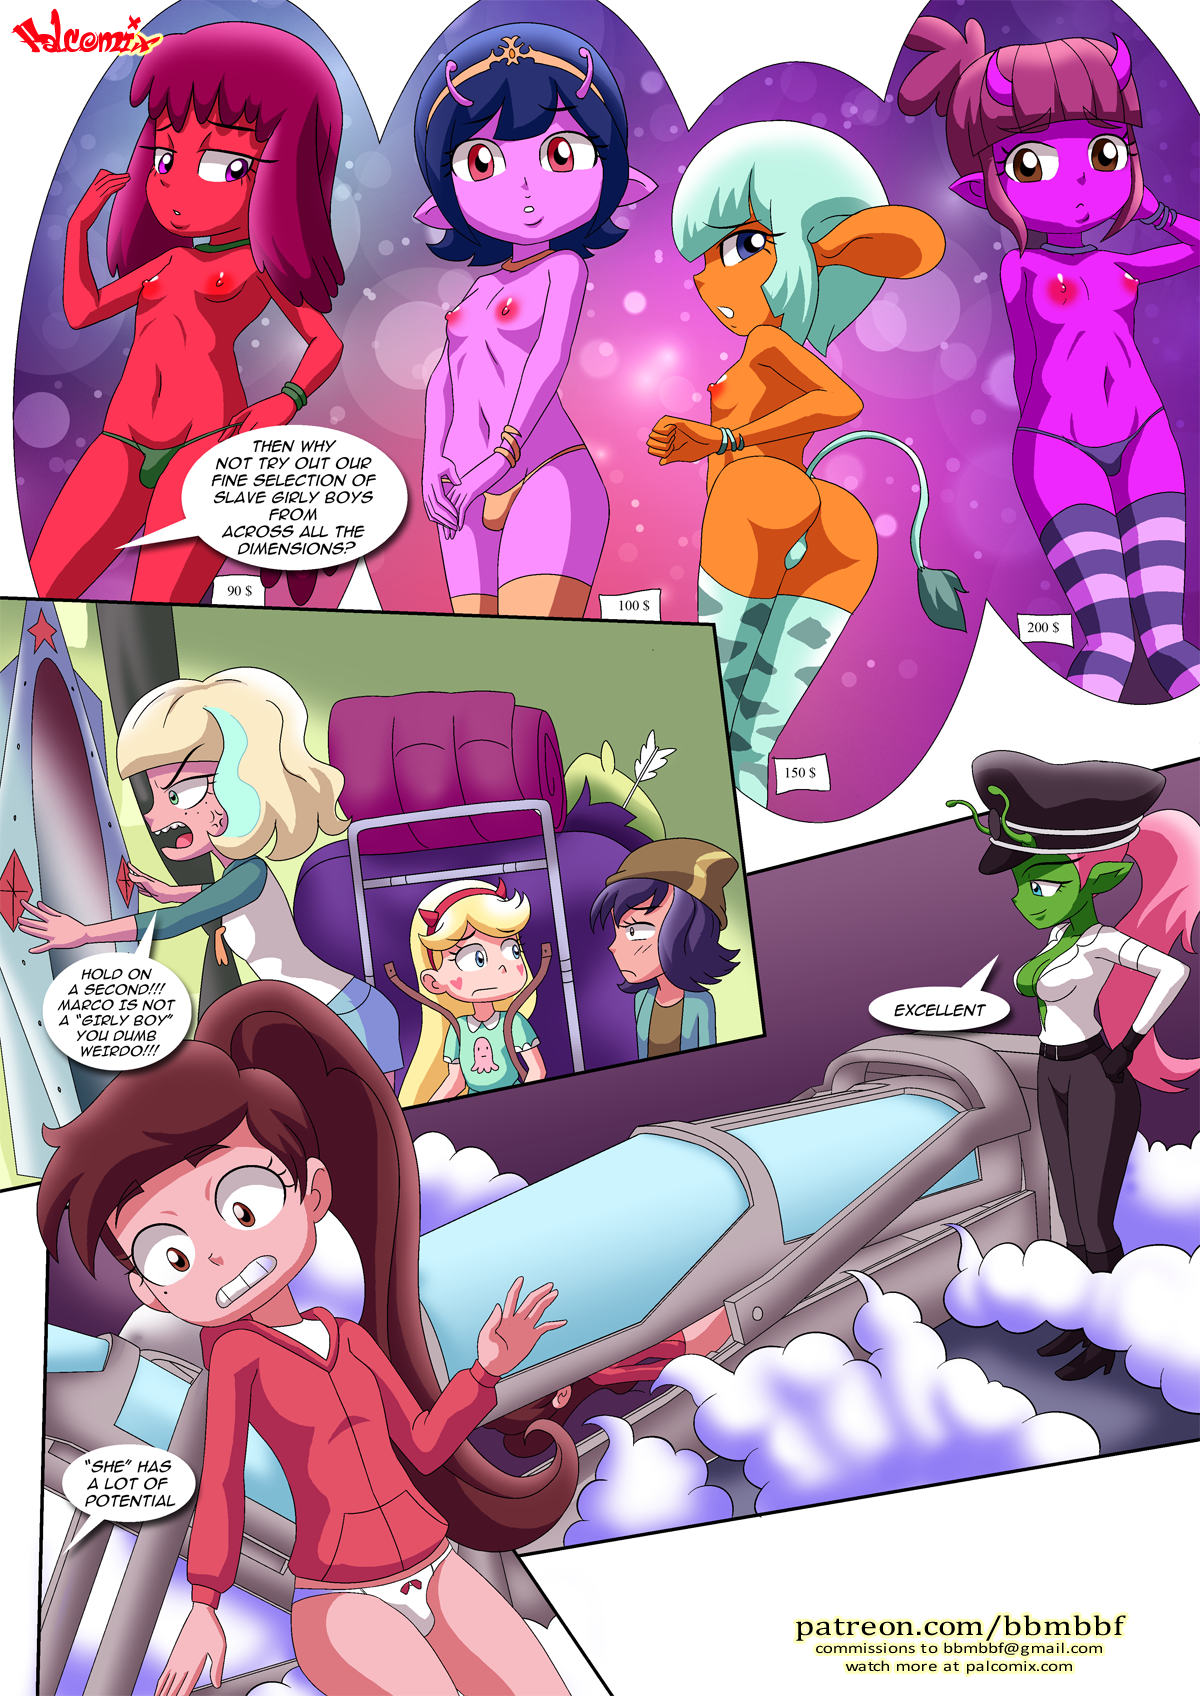 Saving Princess Marco porn comics Oral sex, Aliens, BDSM, Group Sex, Kidnapping, Lesbians, Lolicon, Sci-Fi, Sex Toys, Stockings, Straight Shota, Tentacles